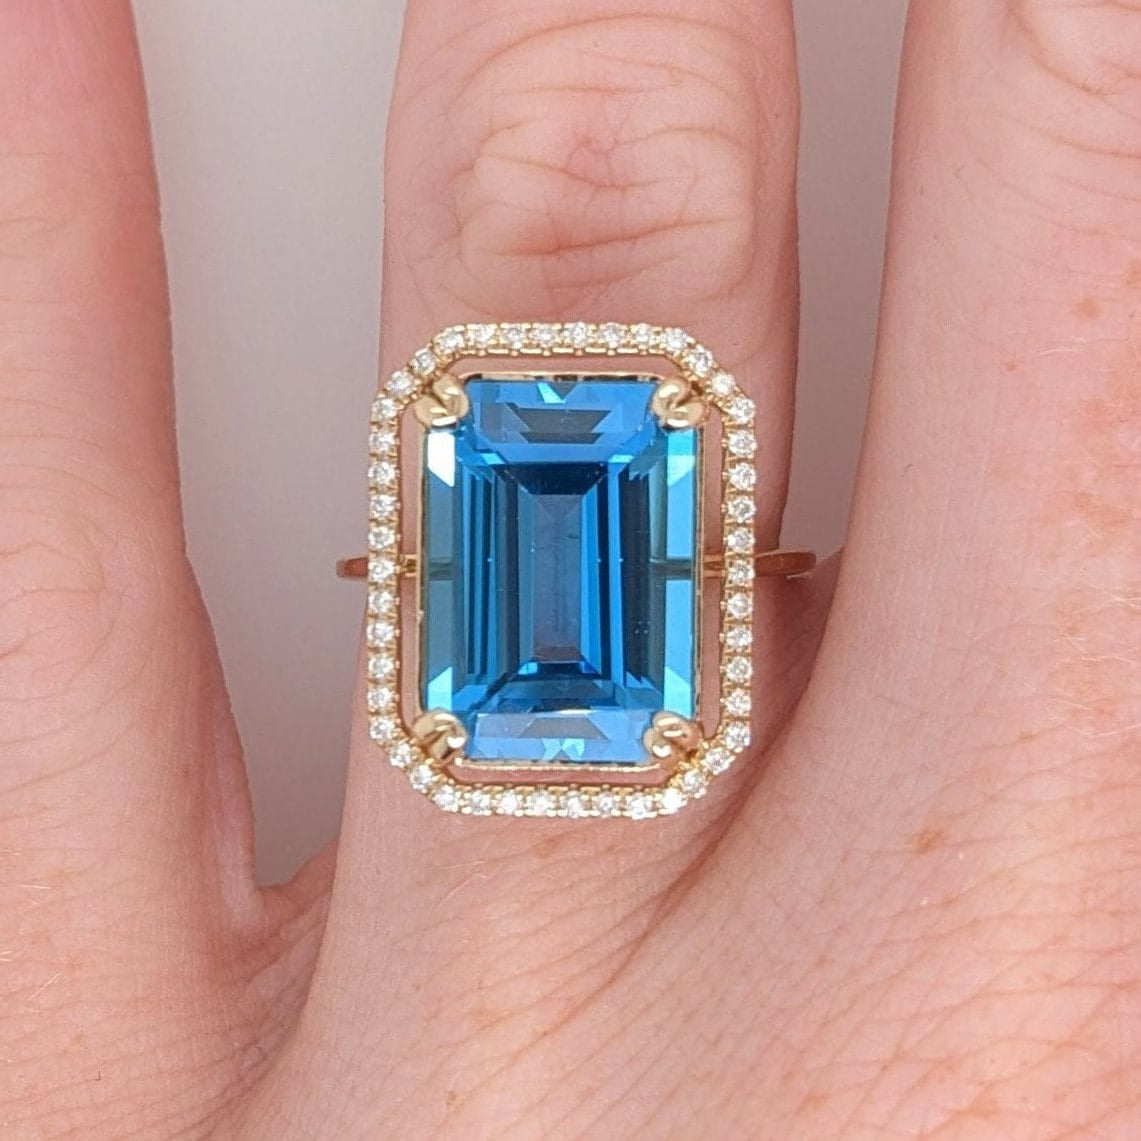 Swiss Blue Topaz Statement Ring w an All Natural Diamond Halo in Solid 14K Yellow Gold | Emerald Cut 14x10mm | December Birthday | Blue Gem